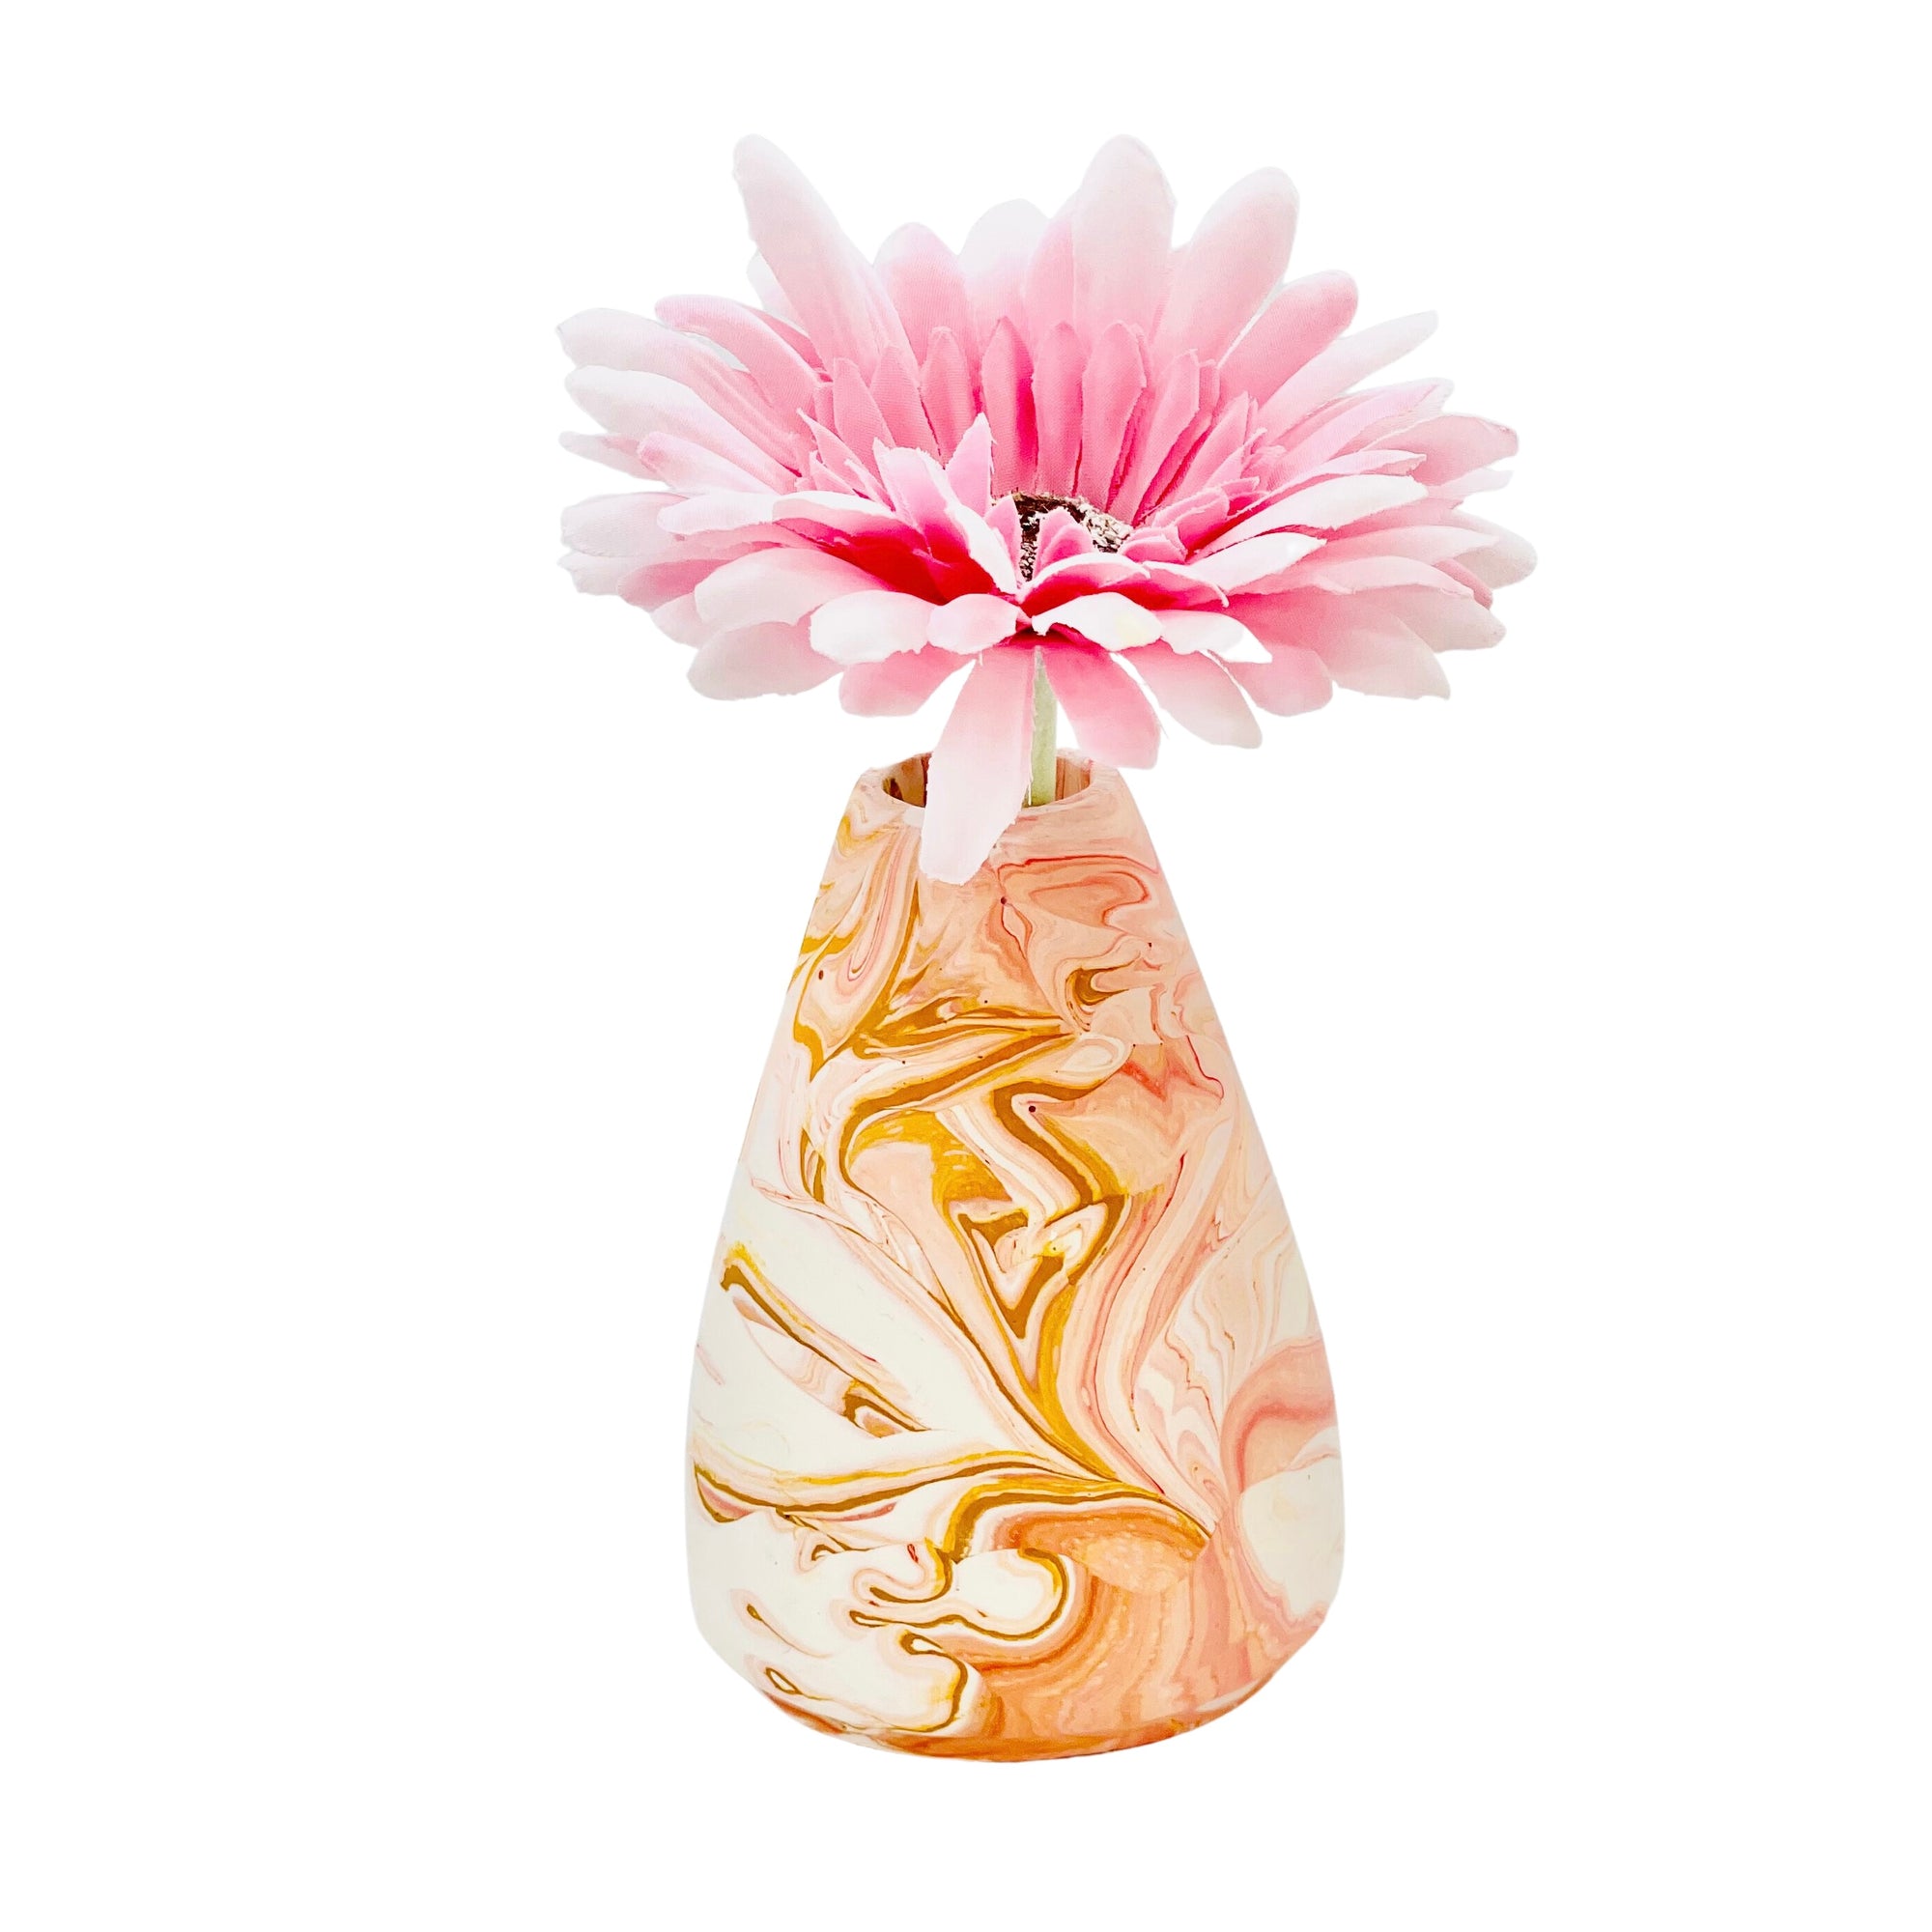 A Jesmonite conical vase that measures 7cm in diameter and 10cm in height marbled with peach pigment.